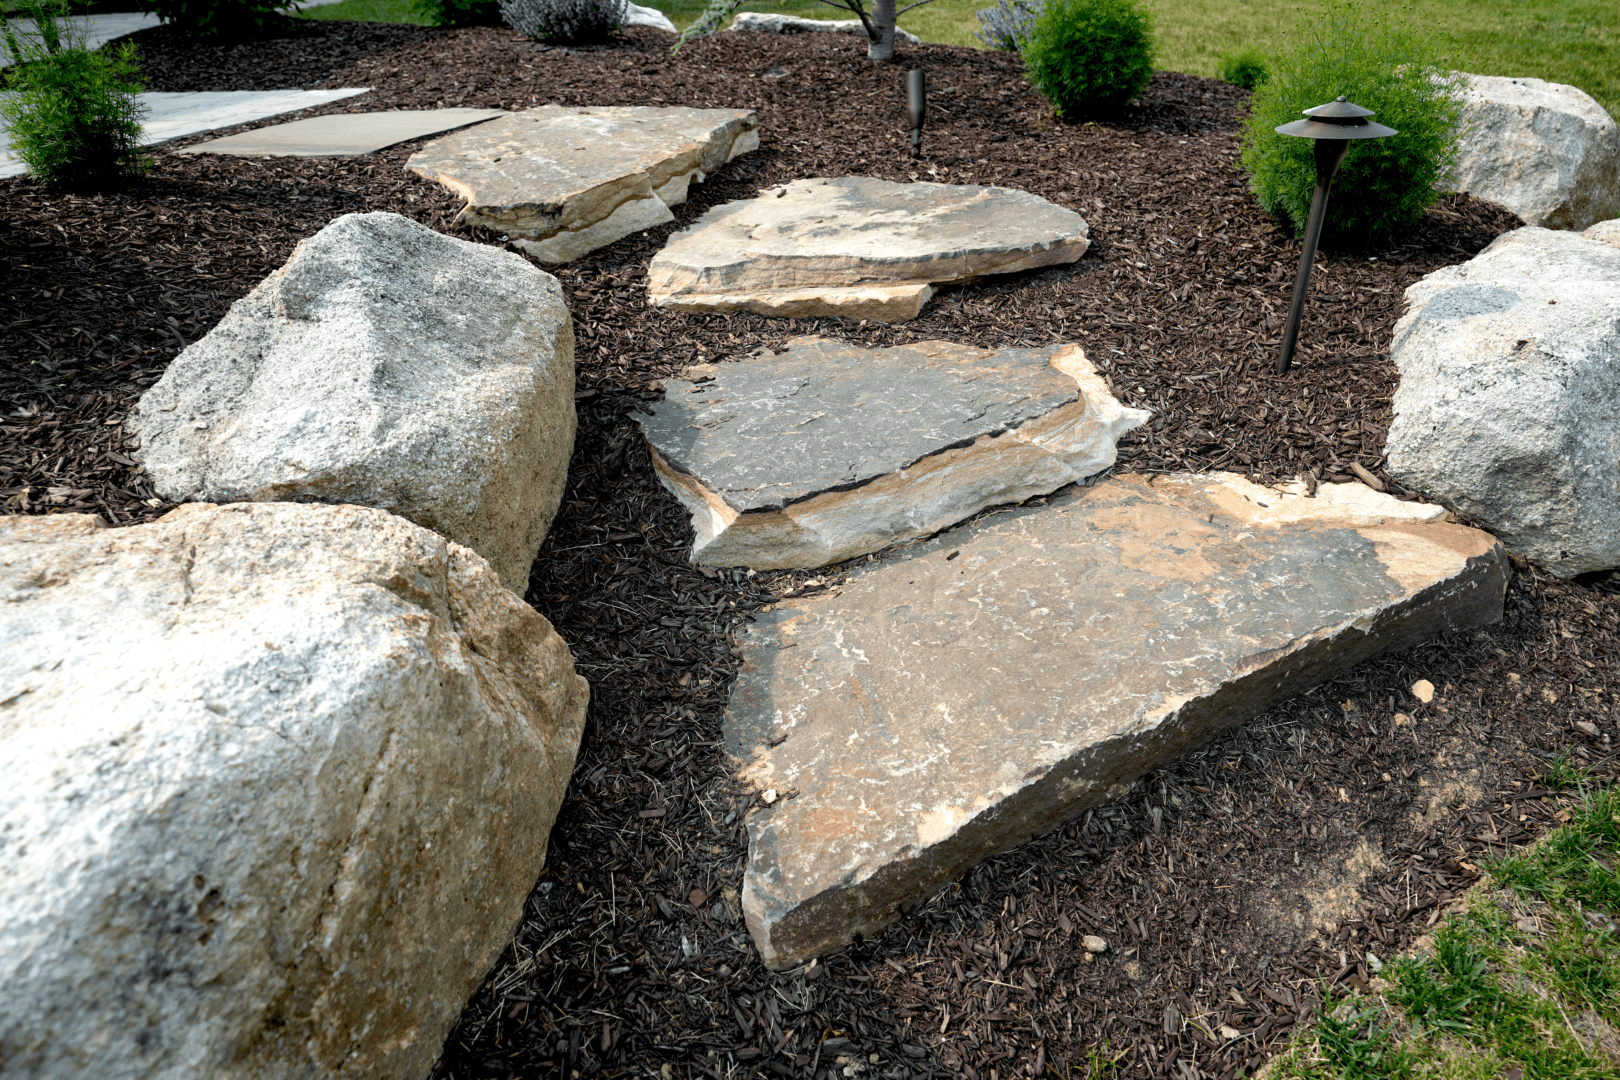 A stone path with boulders in a garden.